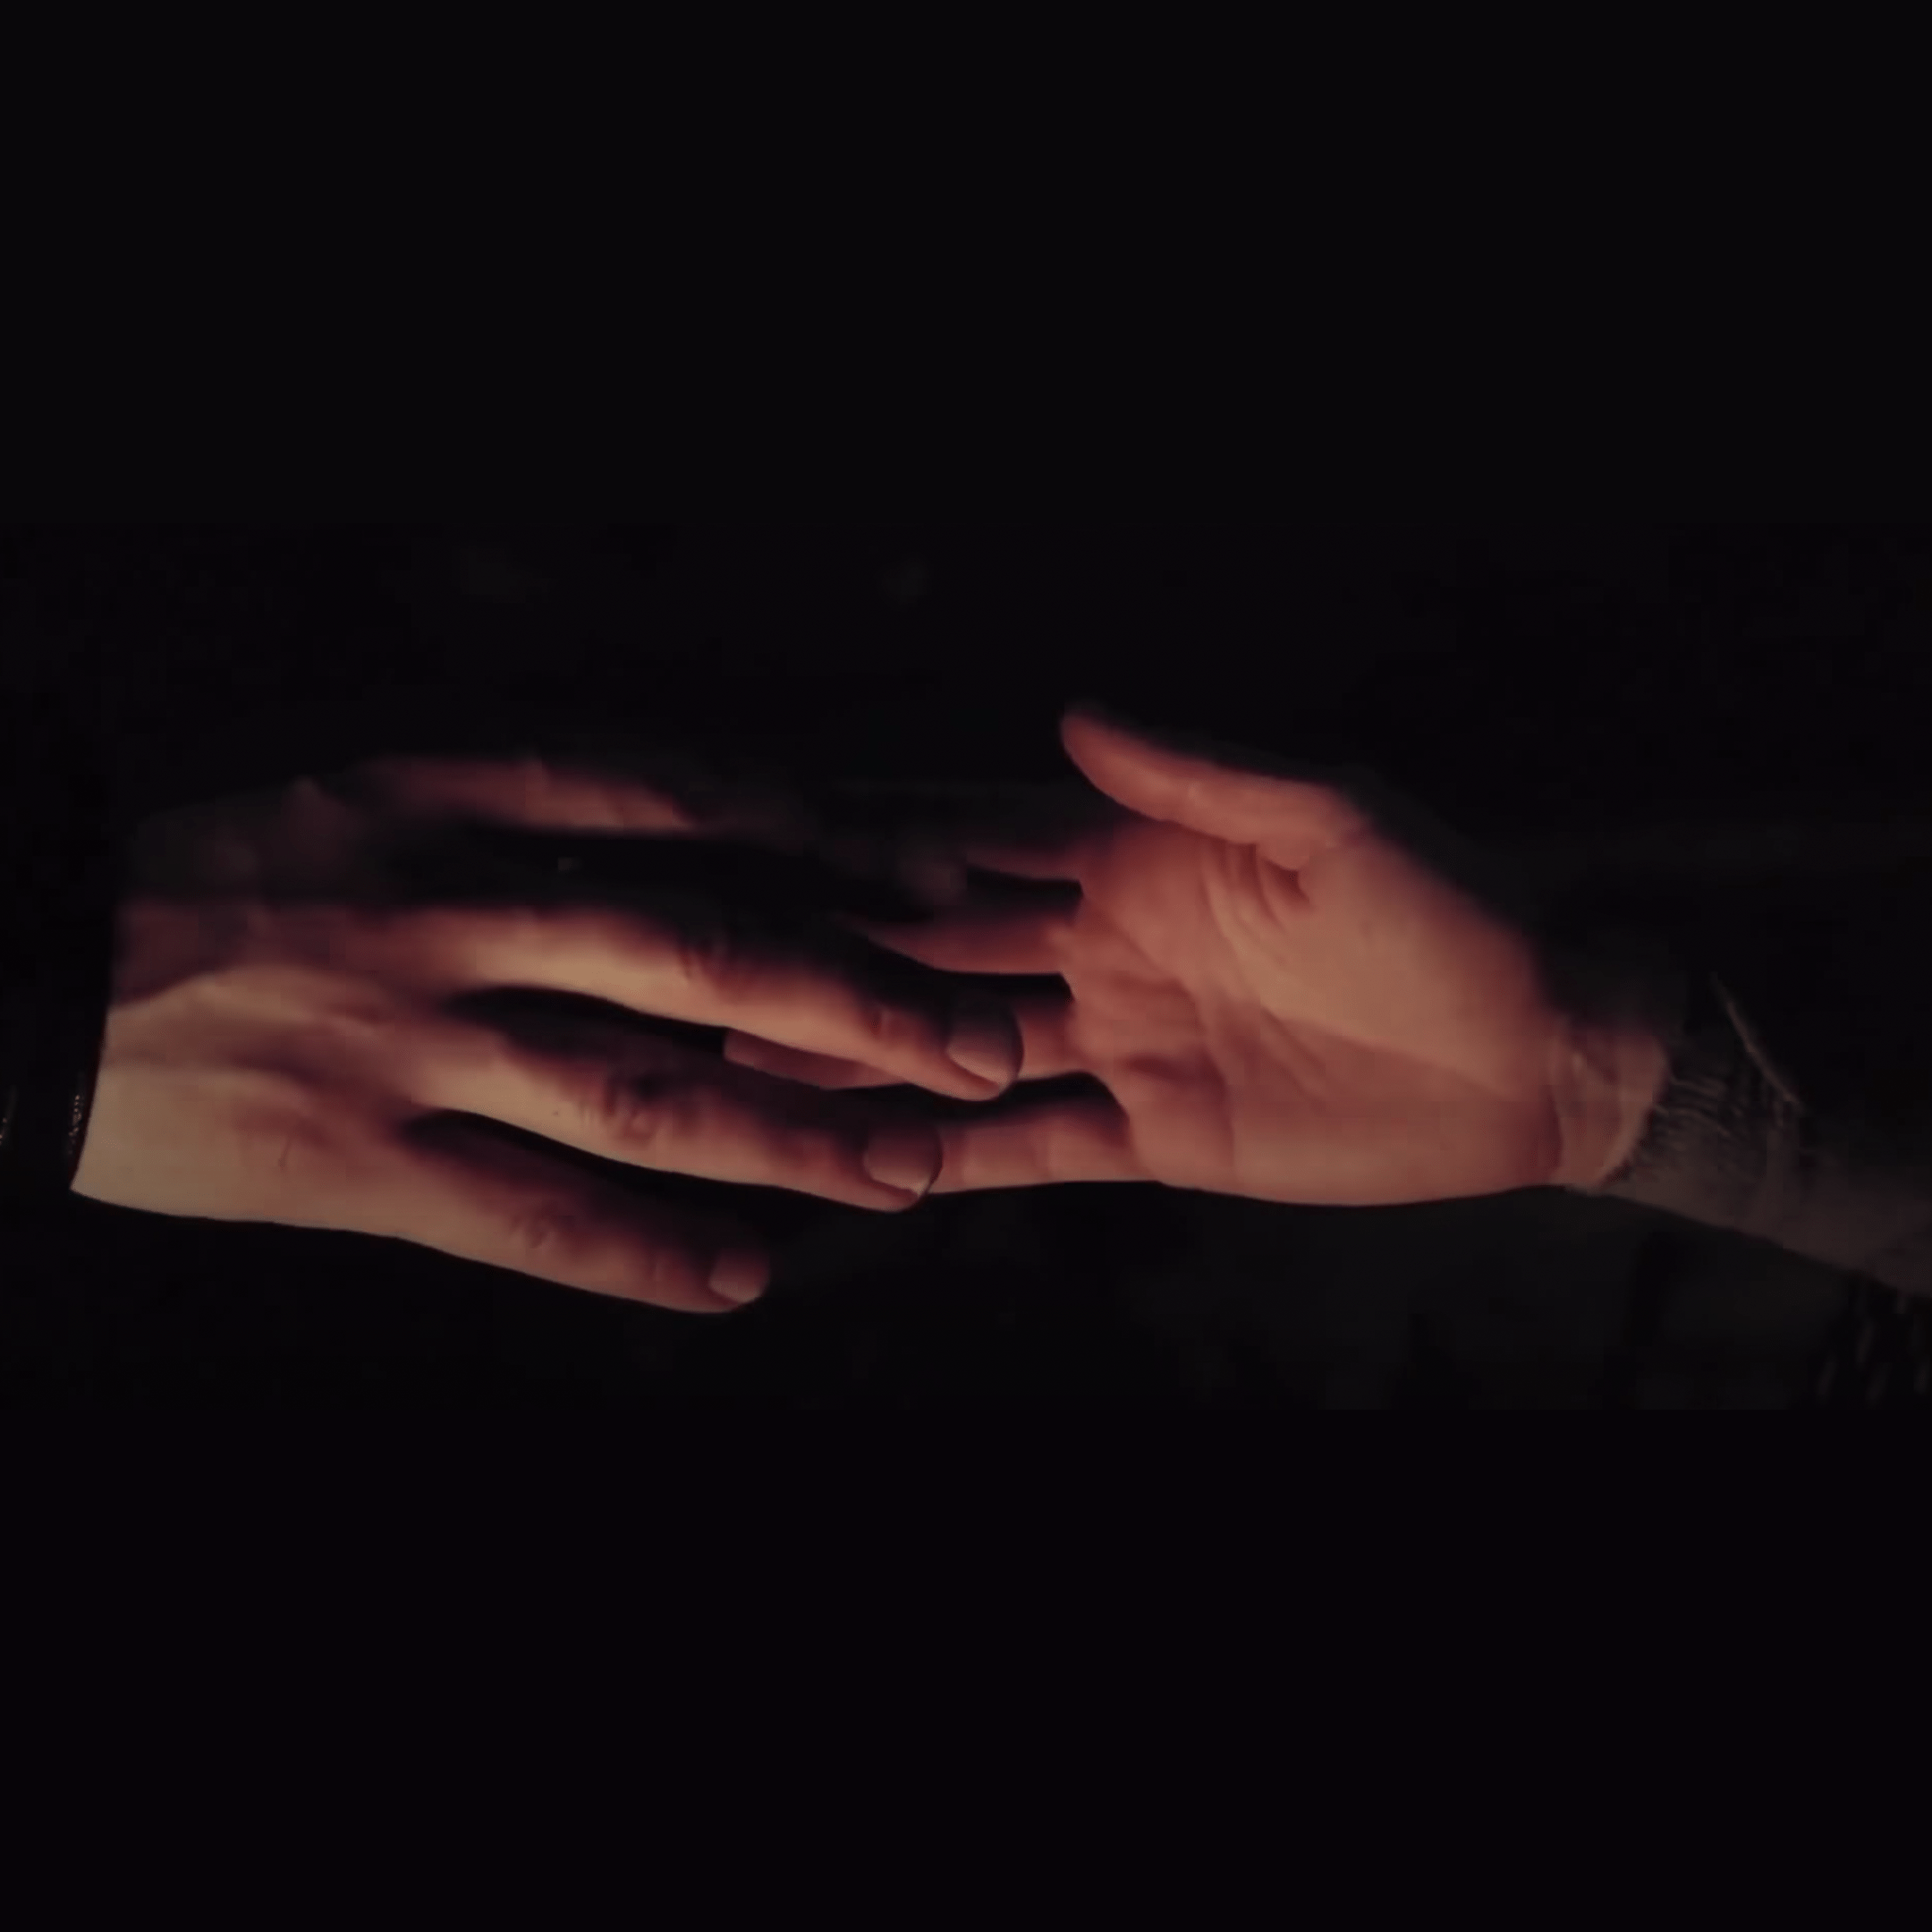 Rey and Kylo Ren's hands touch in the infamous scene from "The Last Jedi."